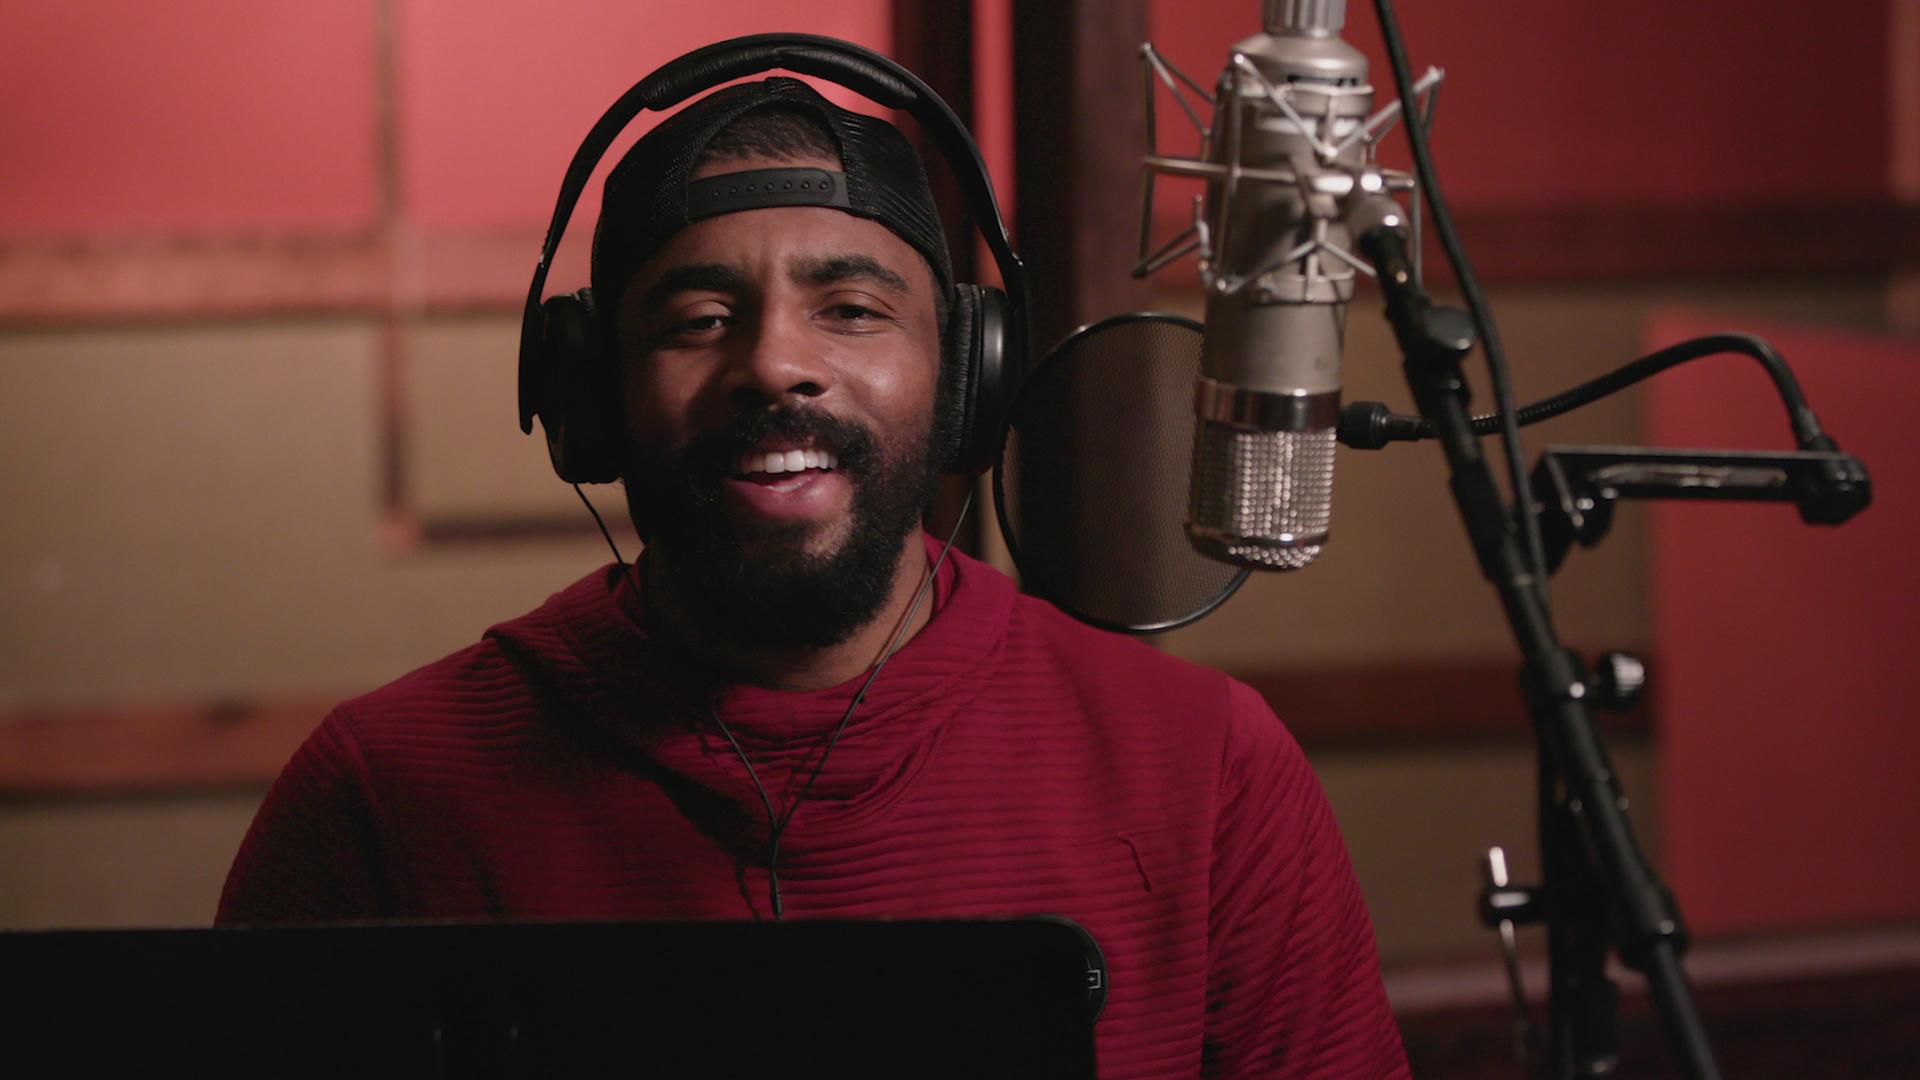 Kyrie Irving - Ridiculous (feat. LunchMoney Lewis) - Behind The Scenes